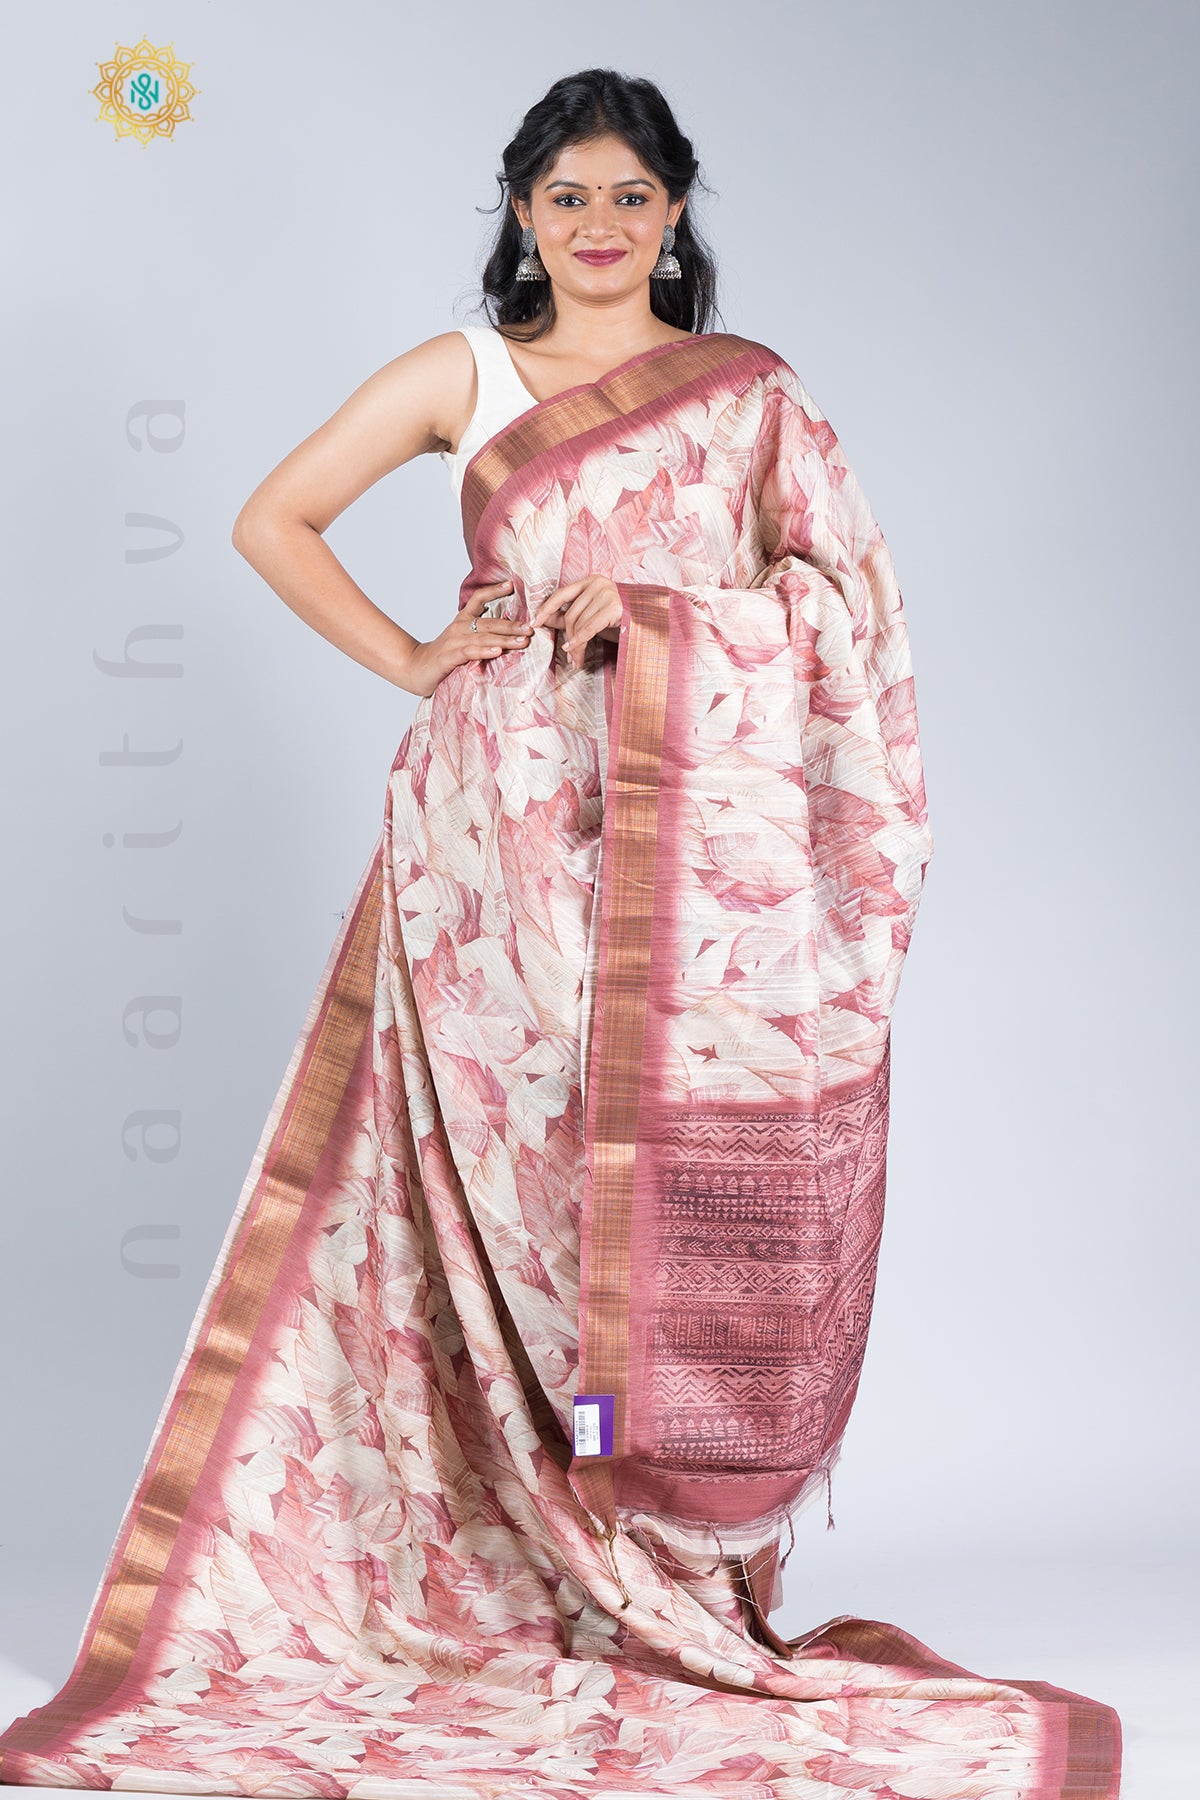 OFF WHITE WITH MAUVE - KOTHA LINEN WITH DIGITAL PRINTS ON THE BODY & TISSUE BORDER